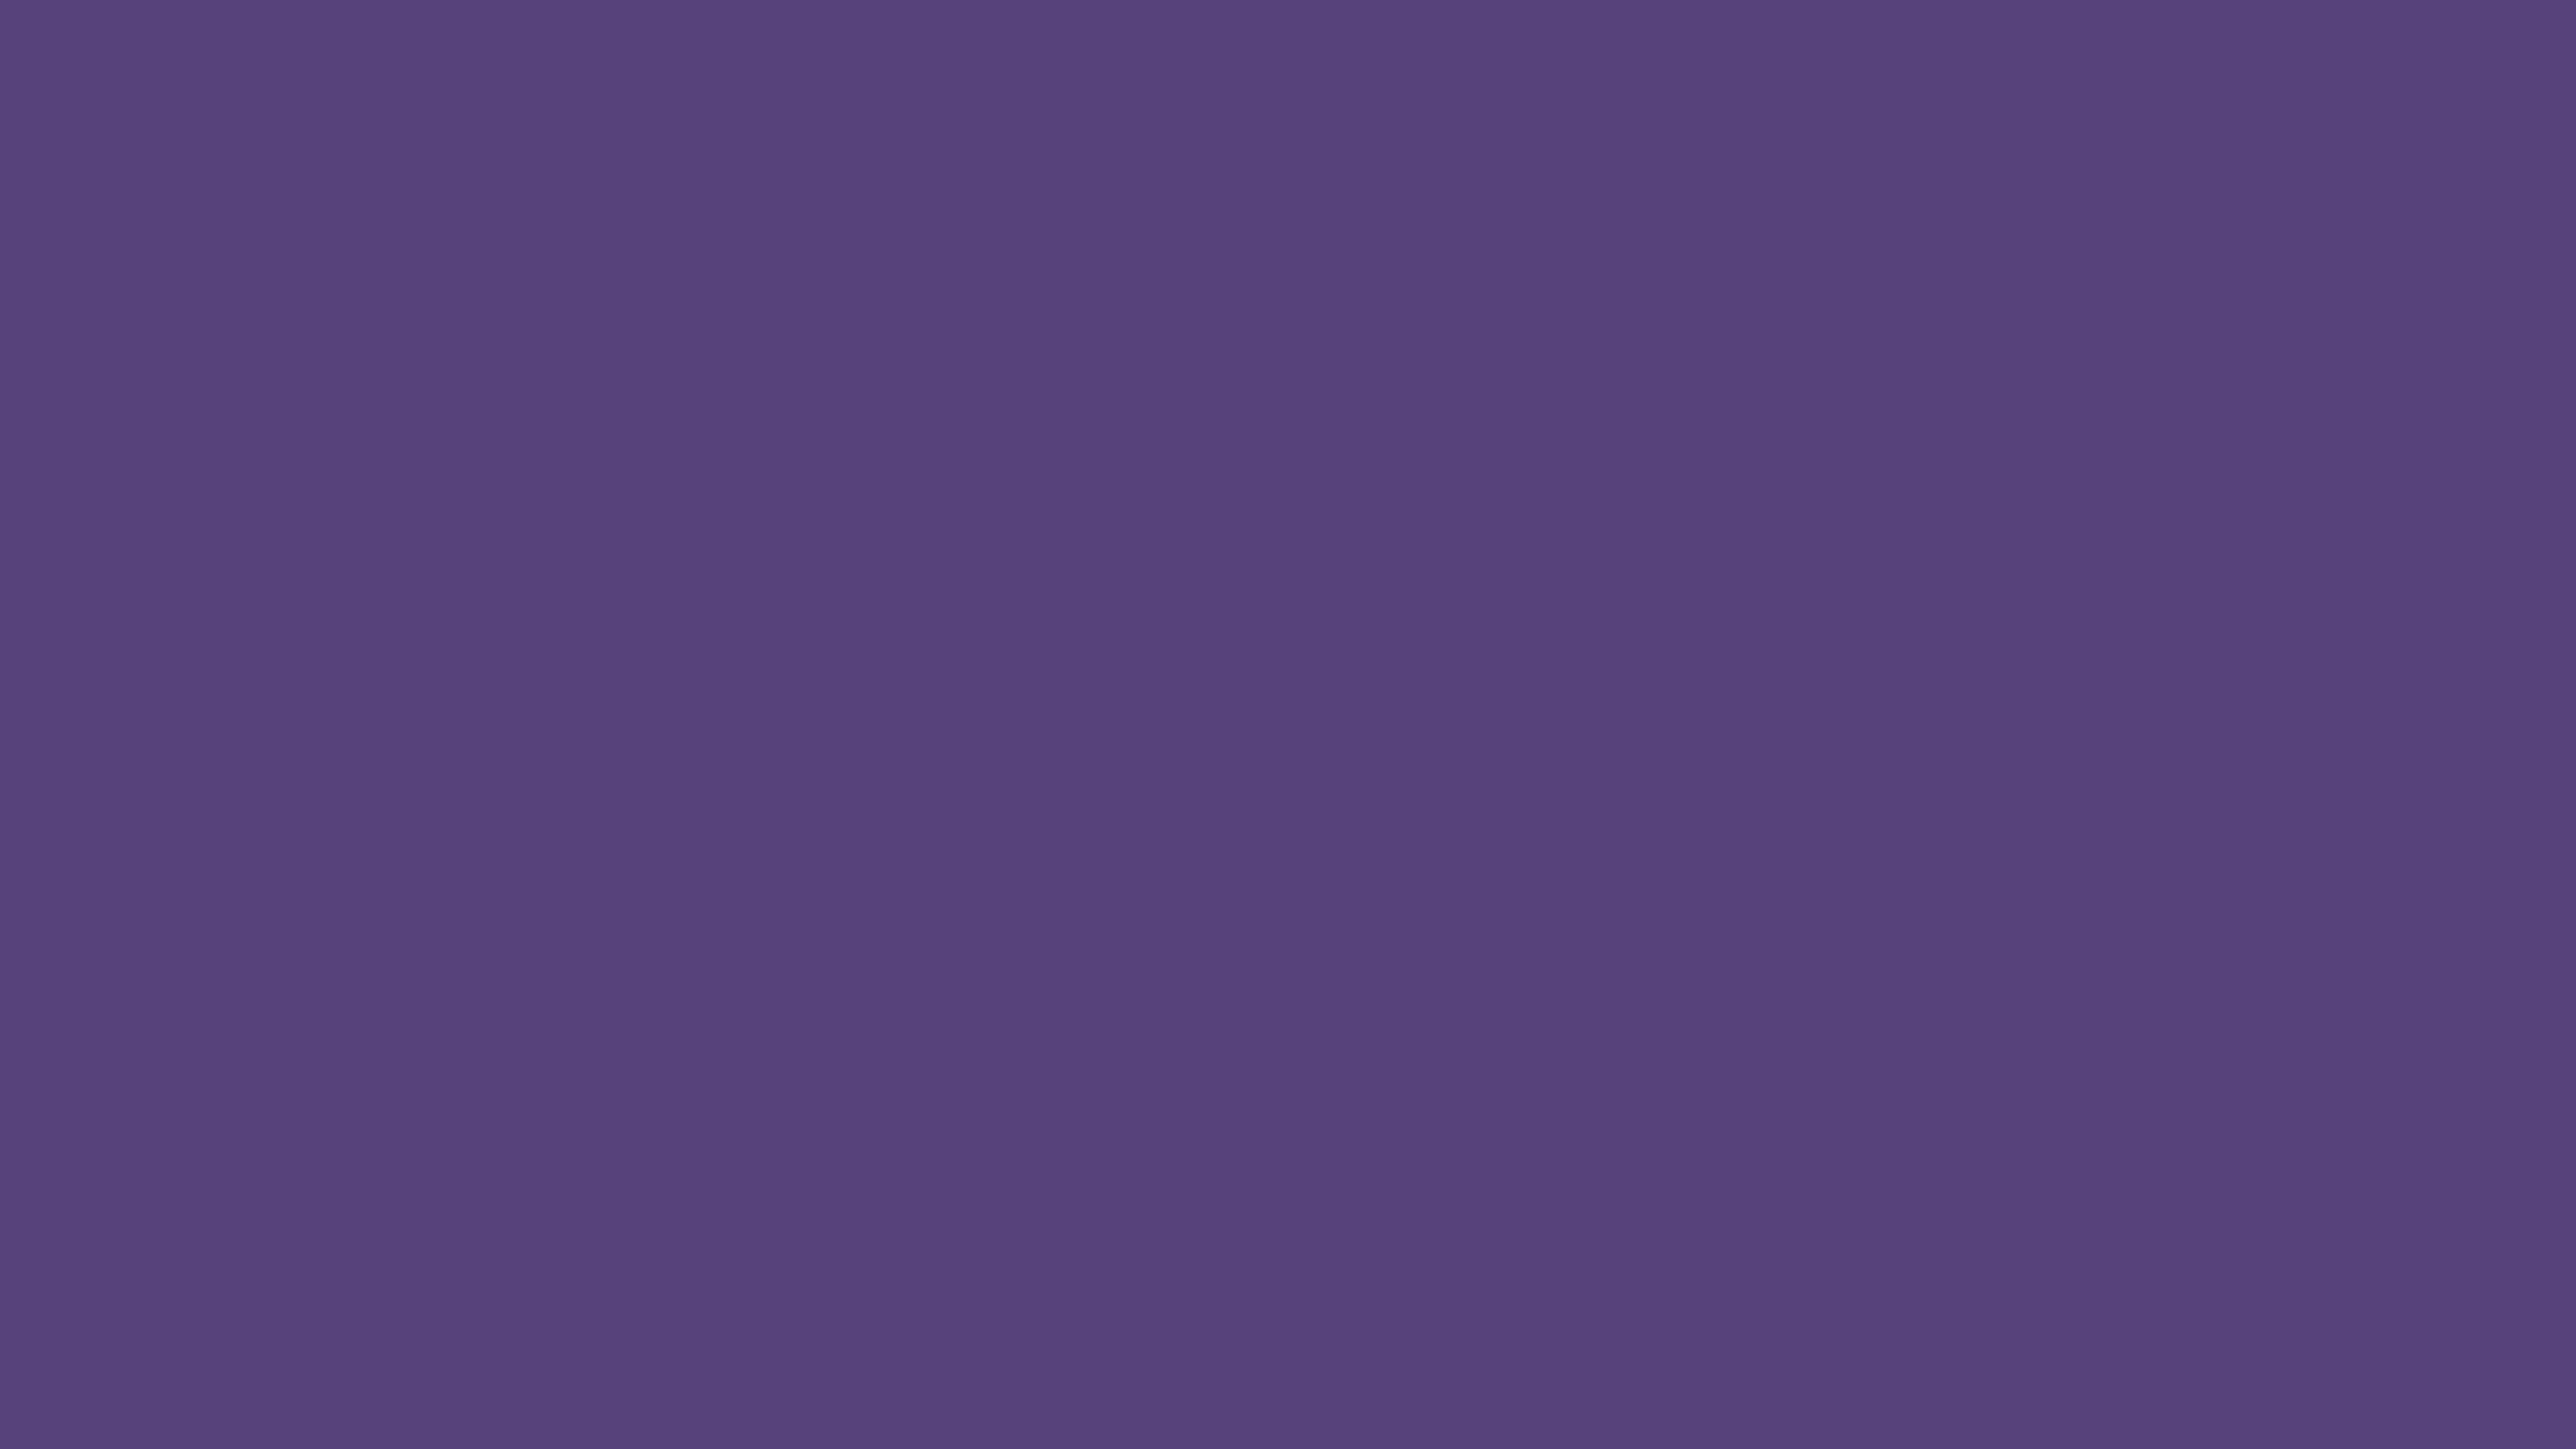 7680x4320 Cyber Grape Solid Color Background